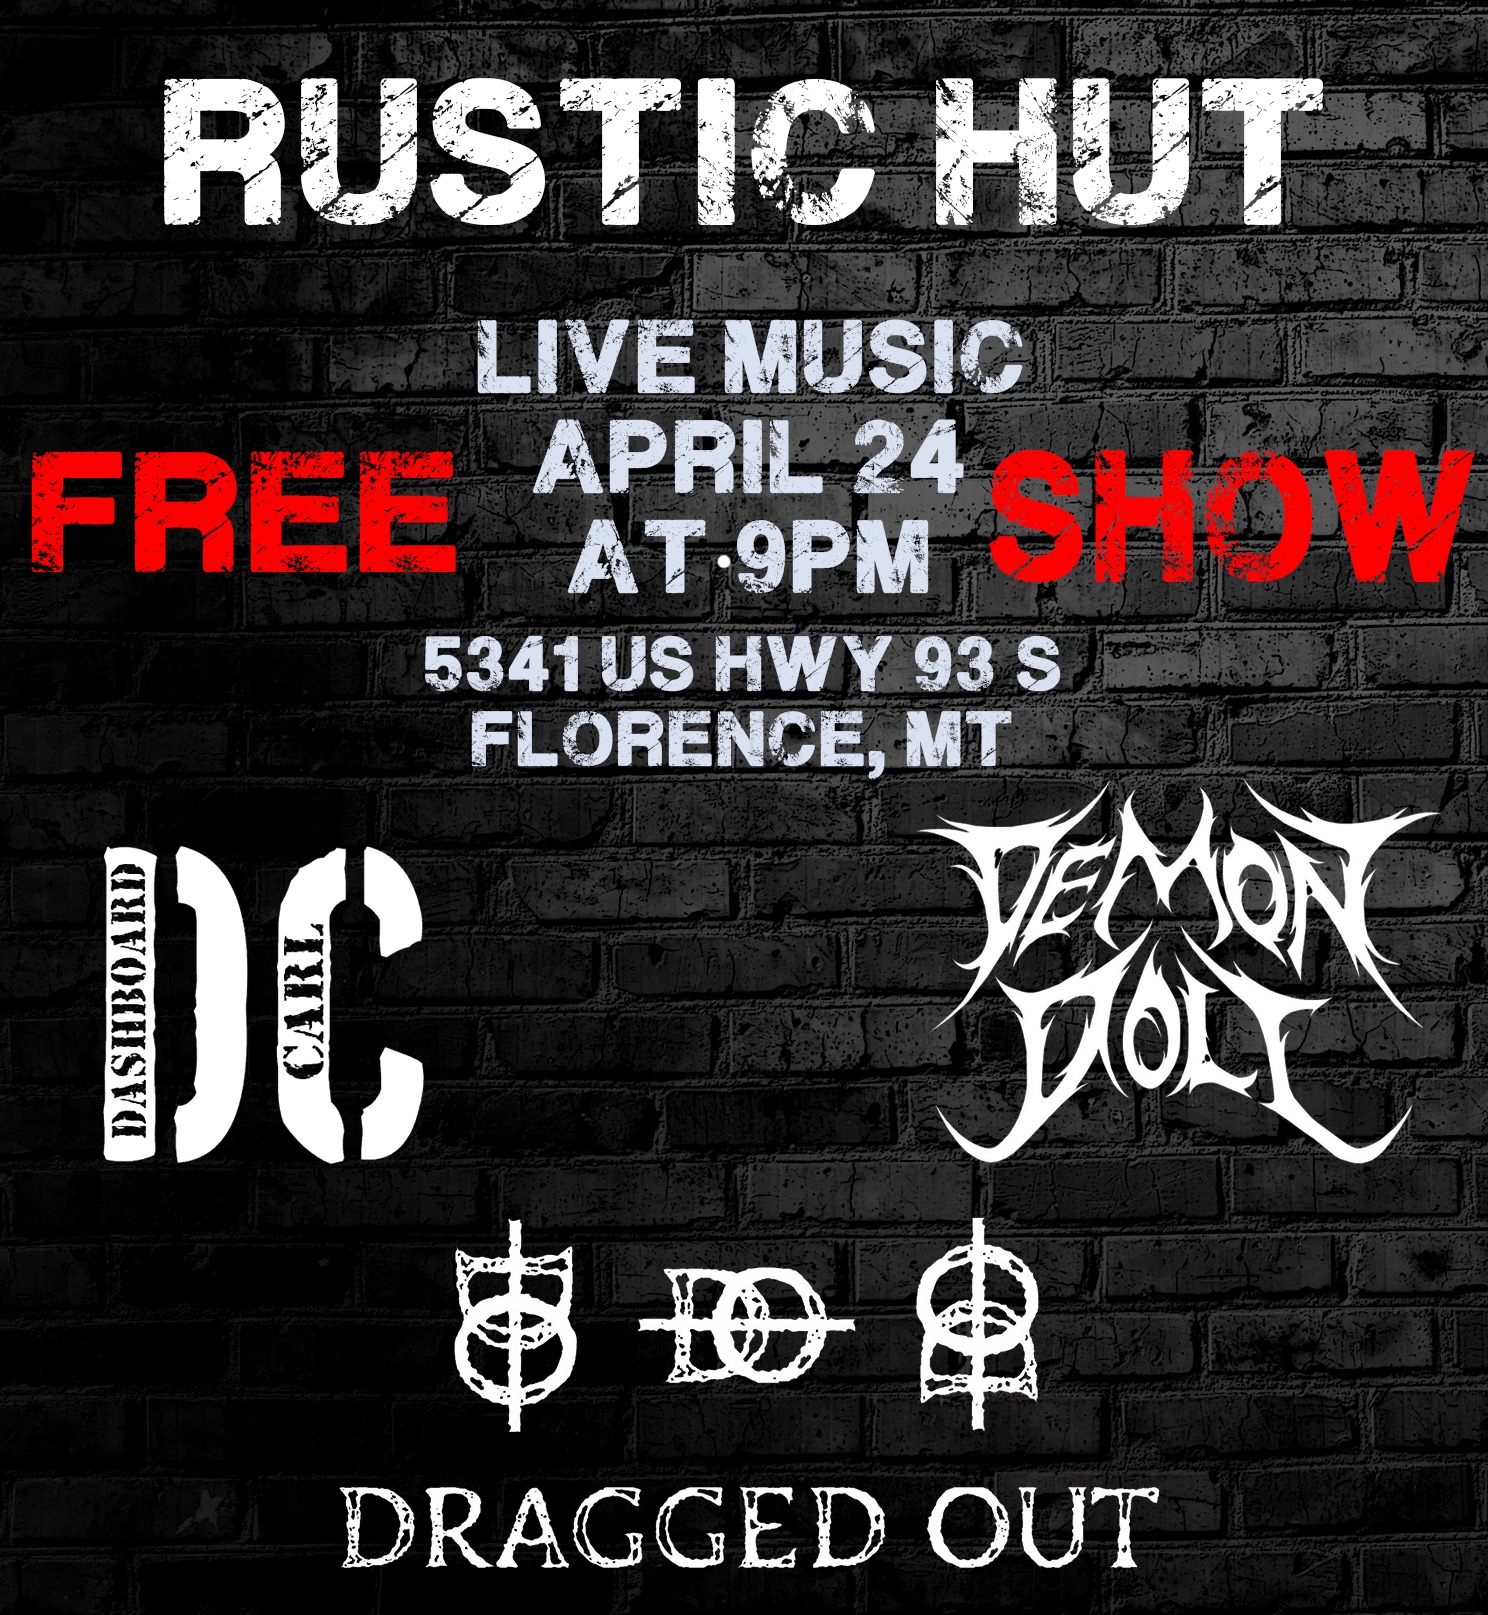 Demon Doll, Dragged Out, Dashboard Carl Live at The Rustic Hut